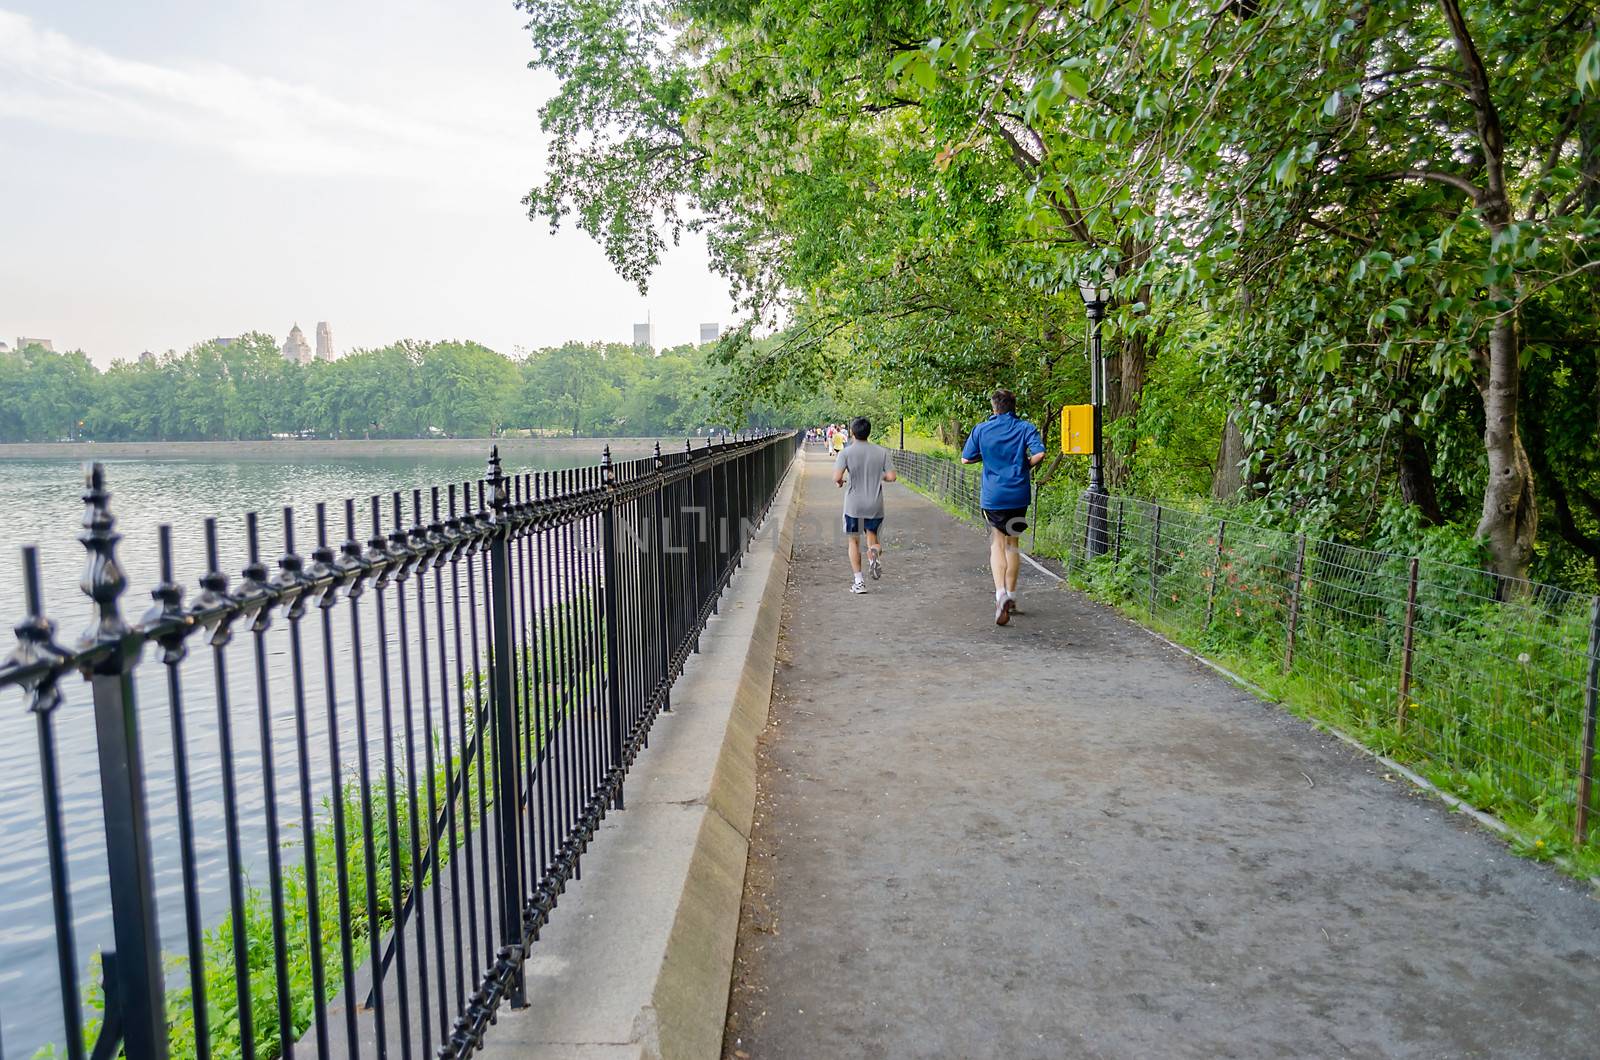 Typical path for Jogging in Central Park, New York